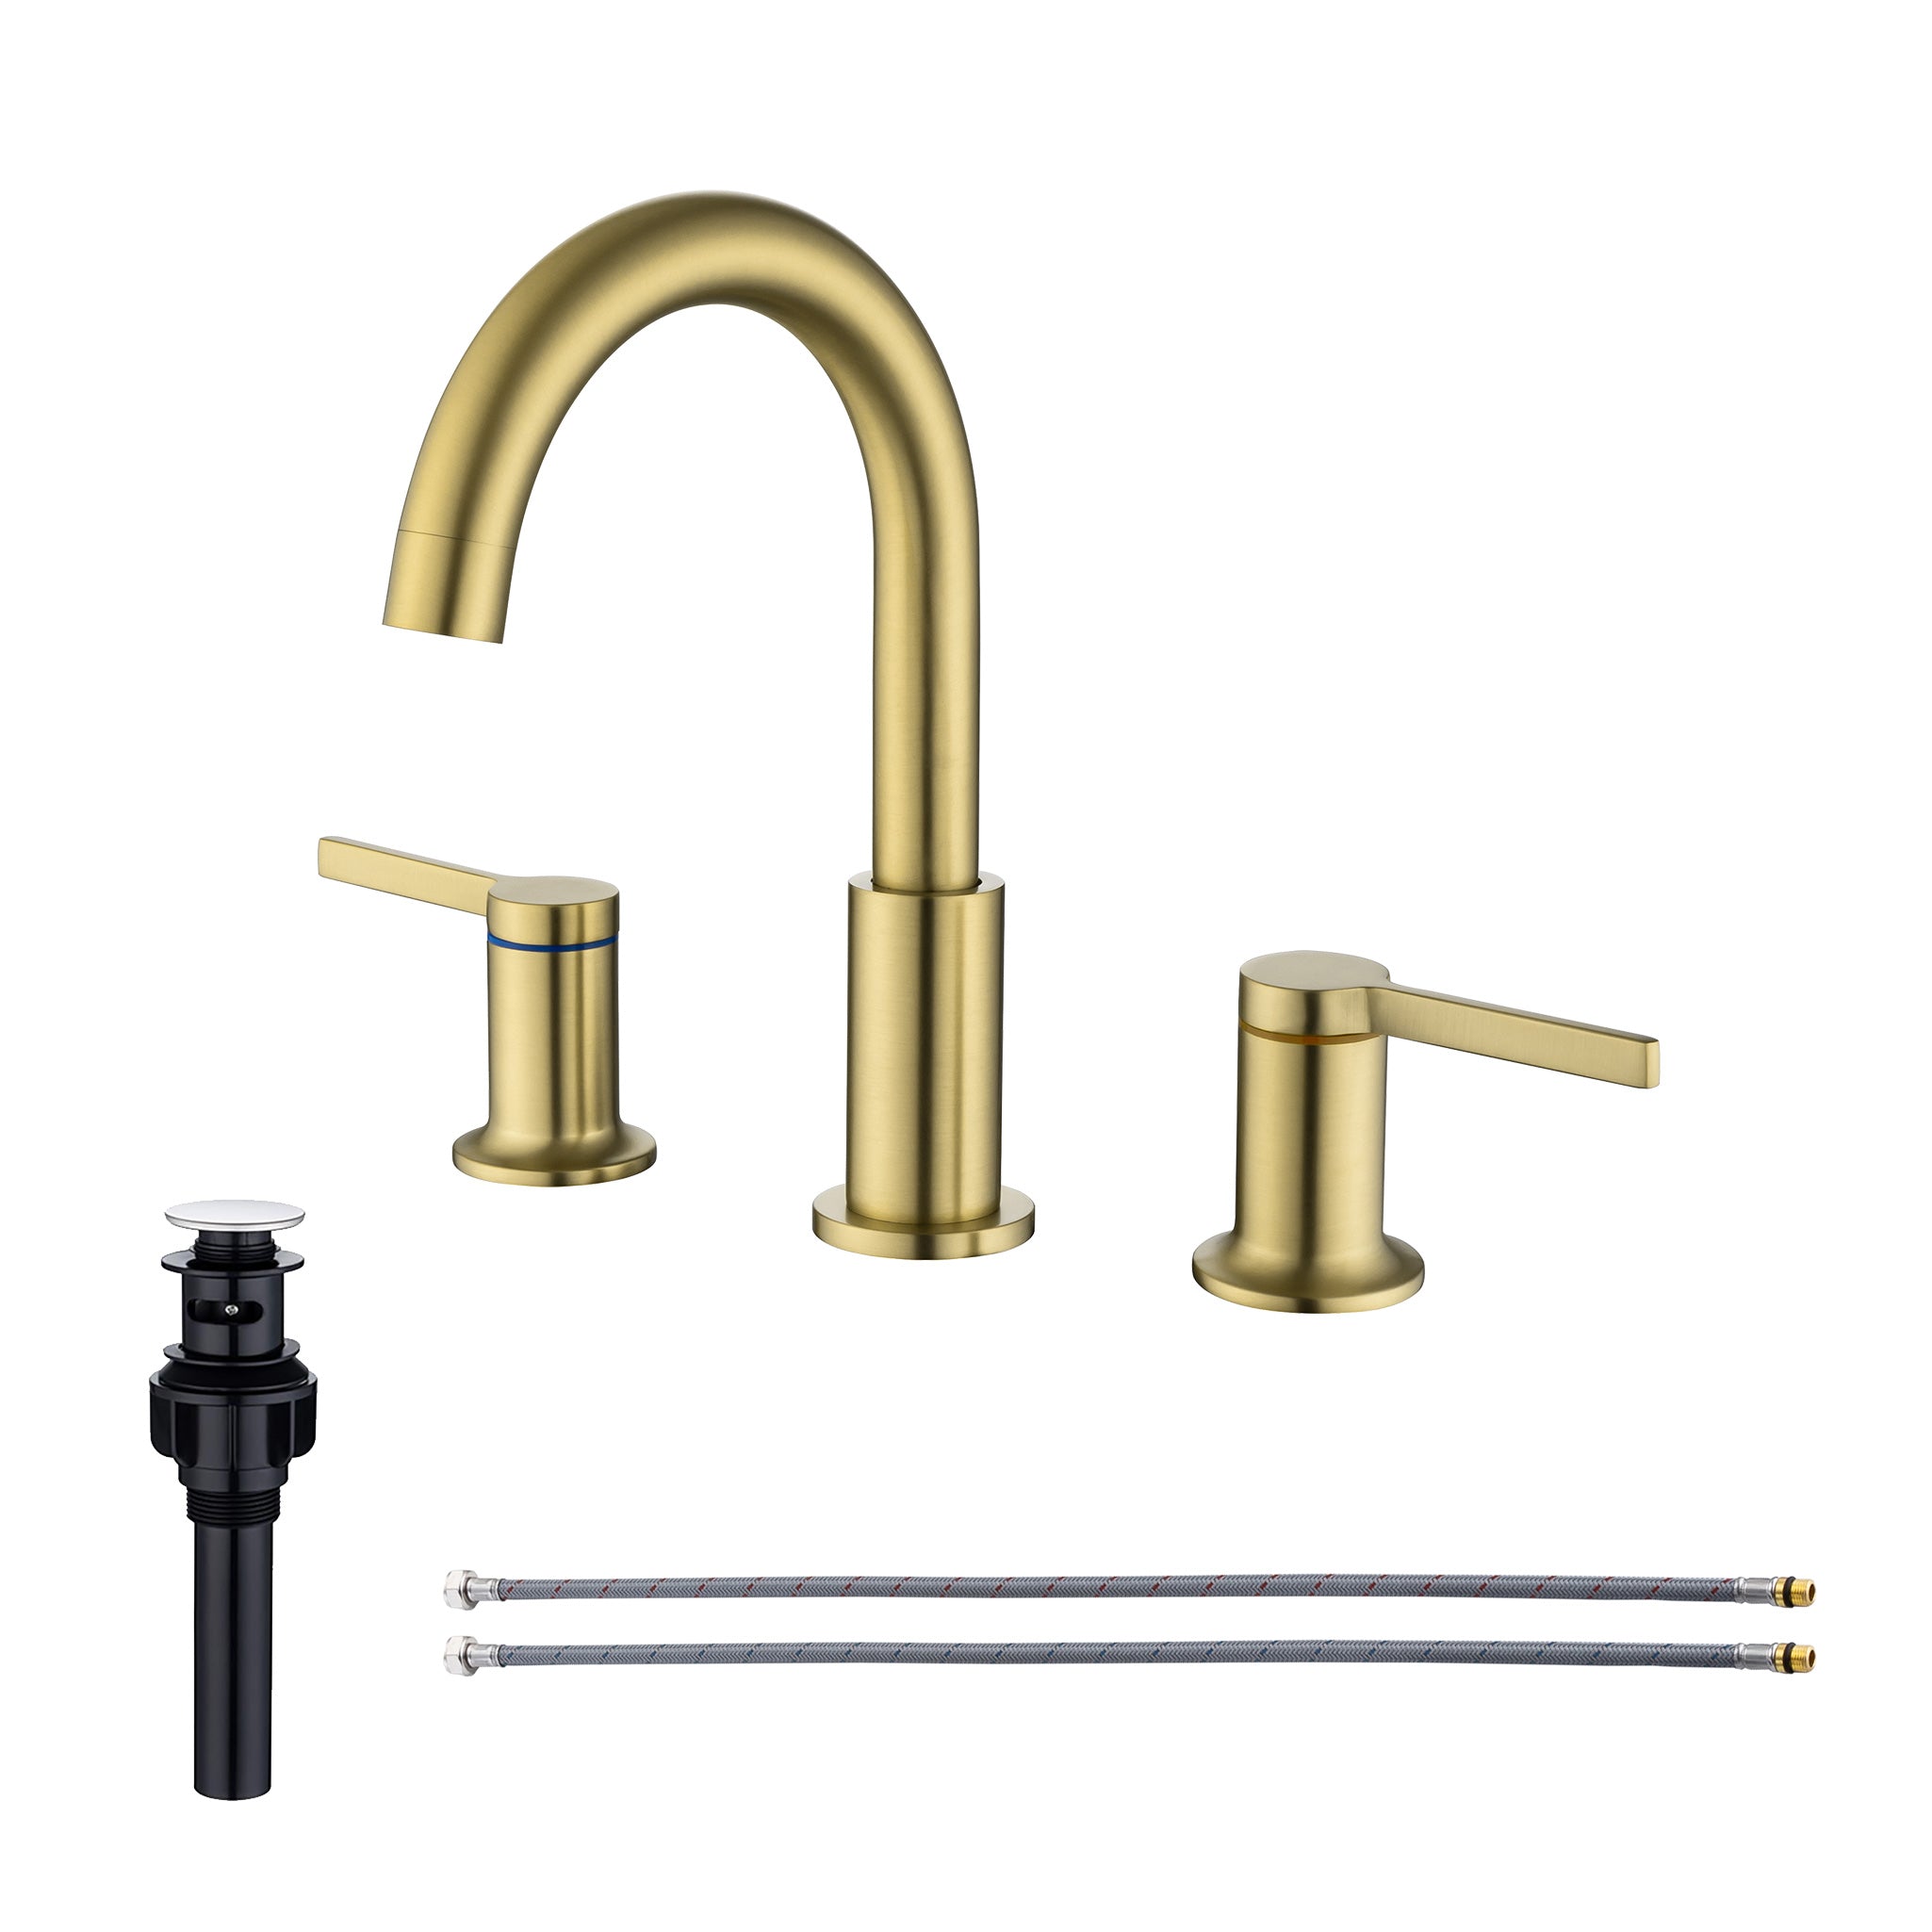 Widespread Faucet 2-handle Bathroom Faucet with Drain Assembly RX5401